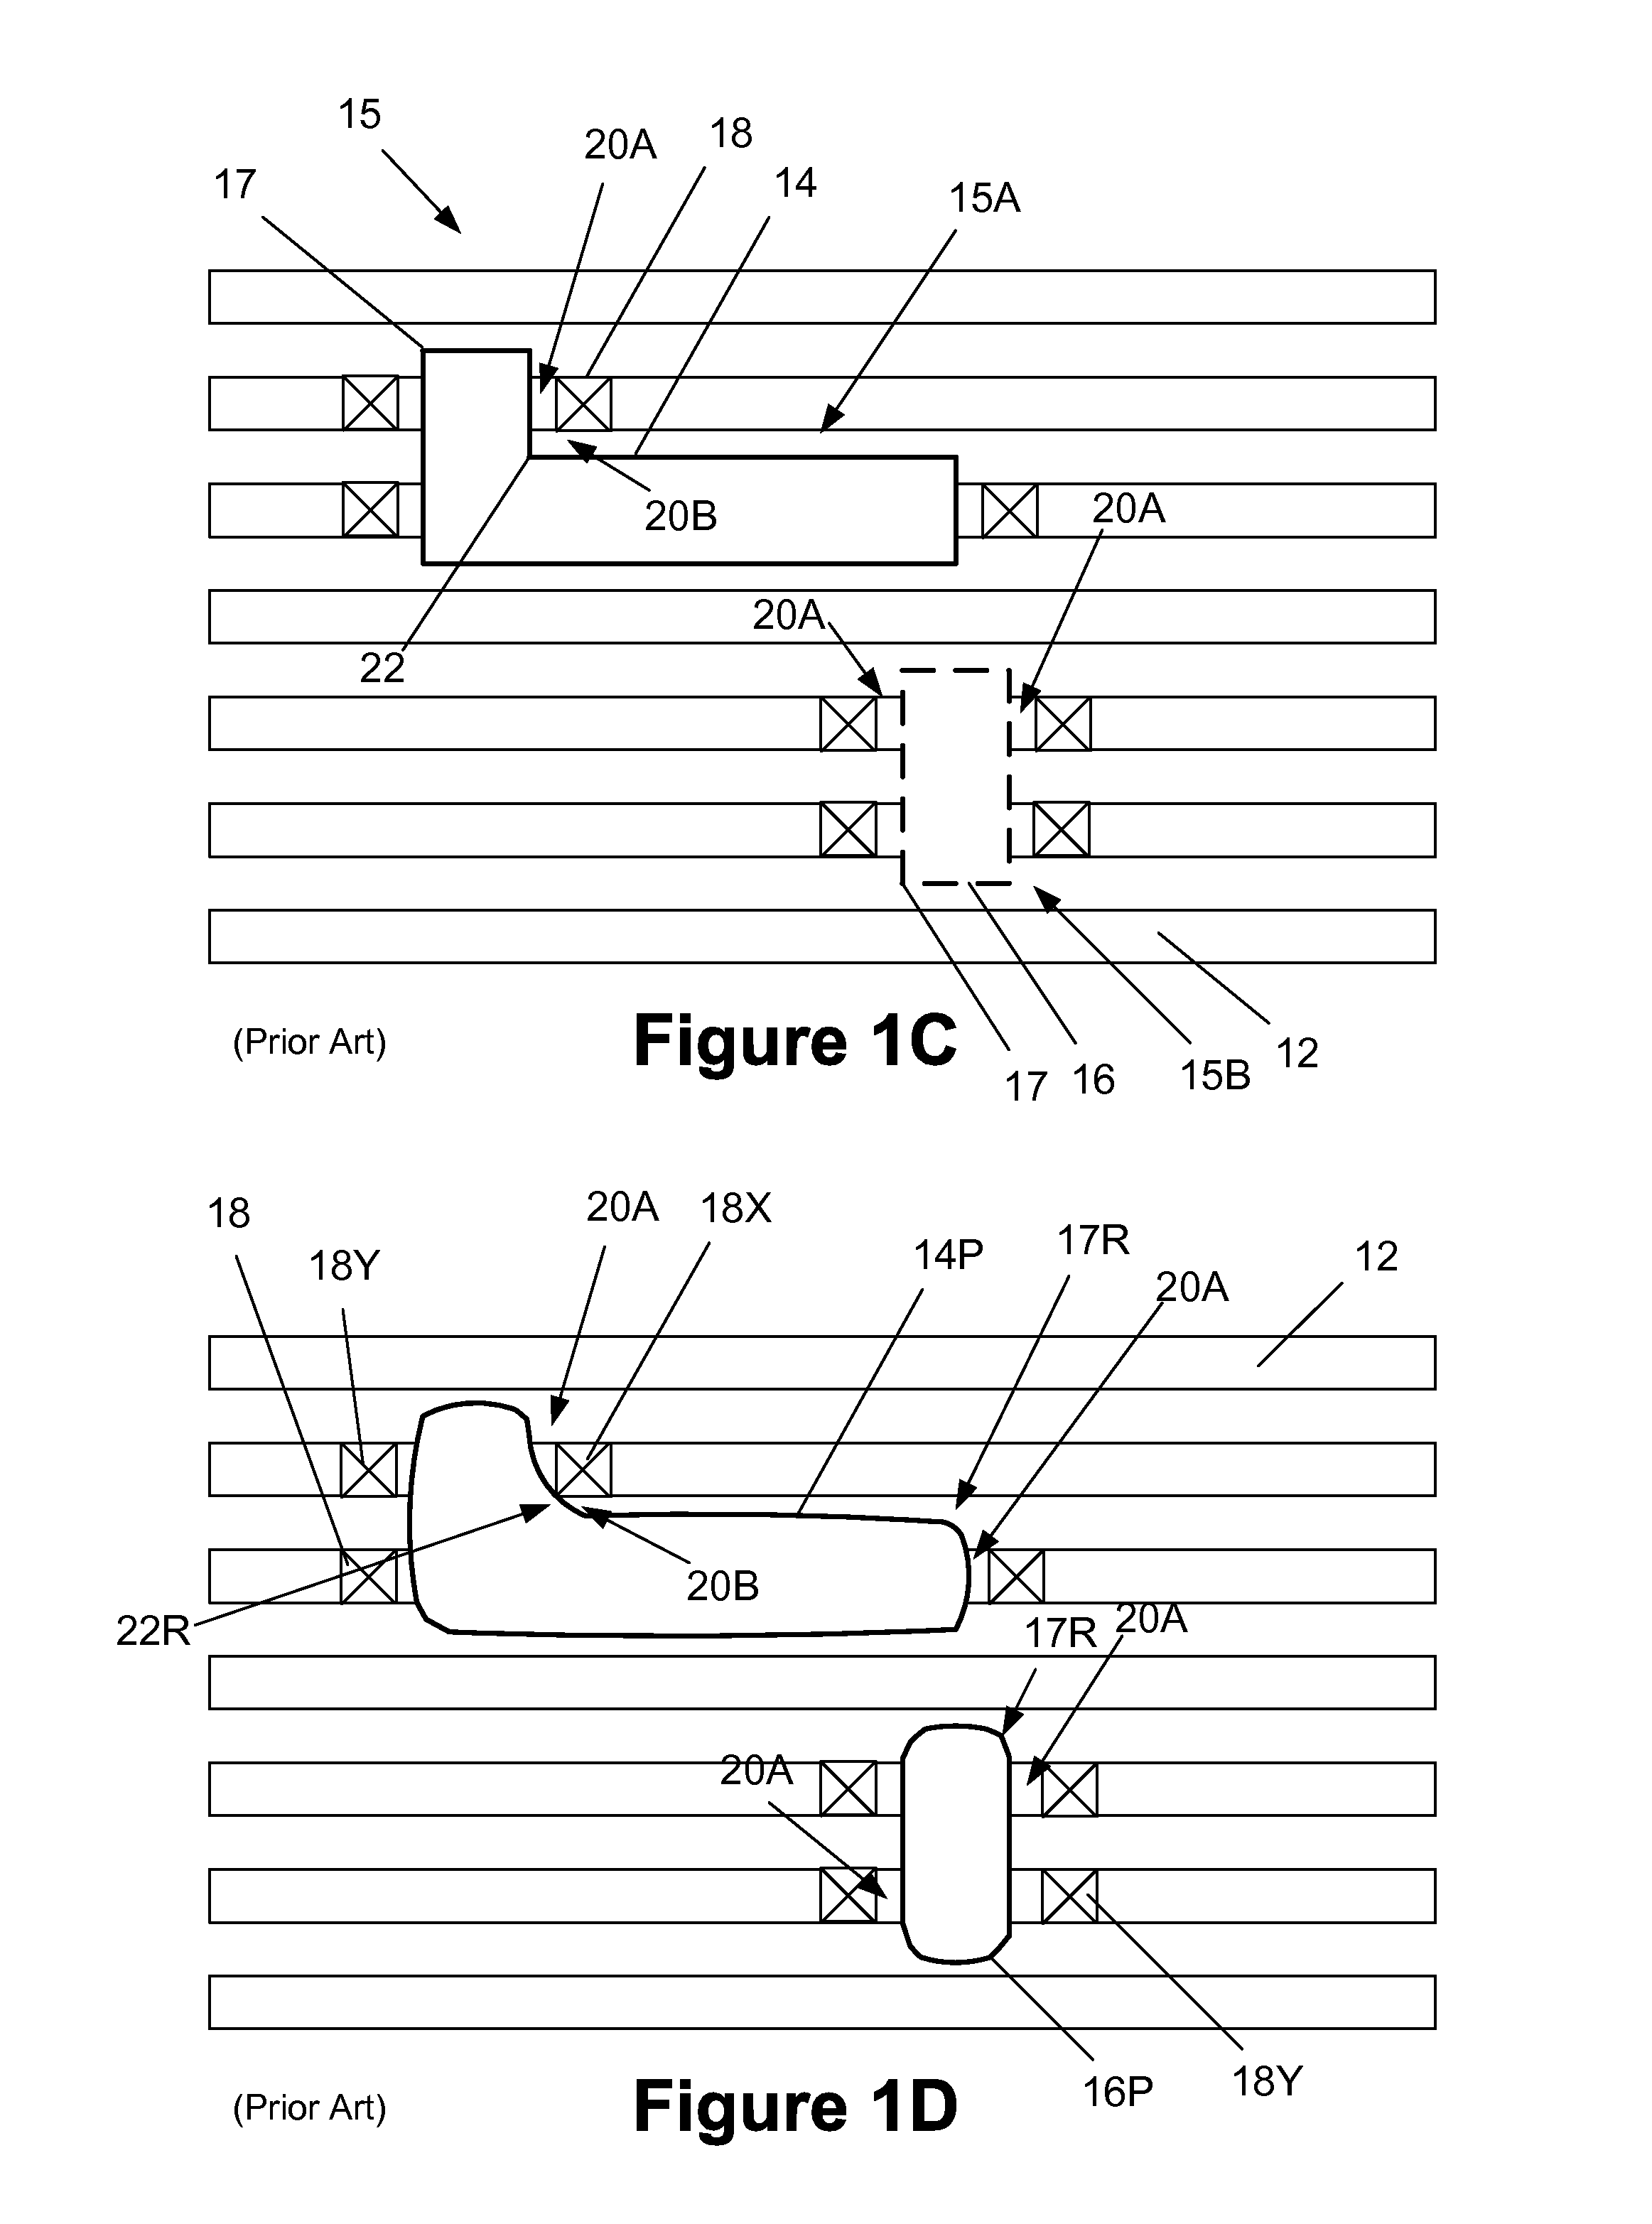 Methods of patterning line-type features using a multiple patterning process that enables the use of tighter contact enclosure spacing rules